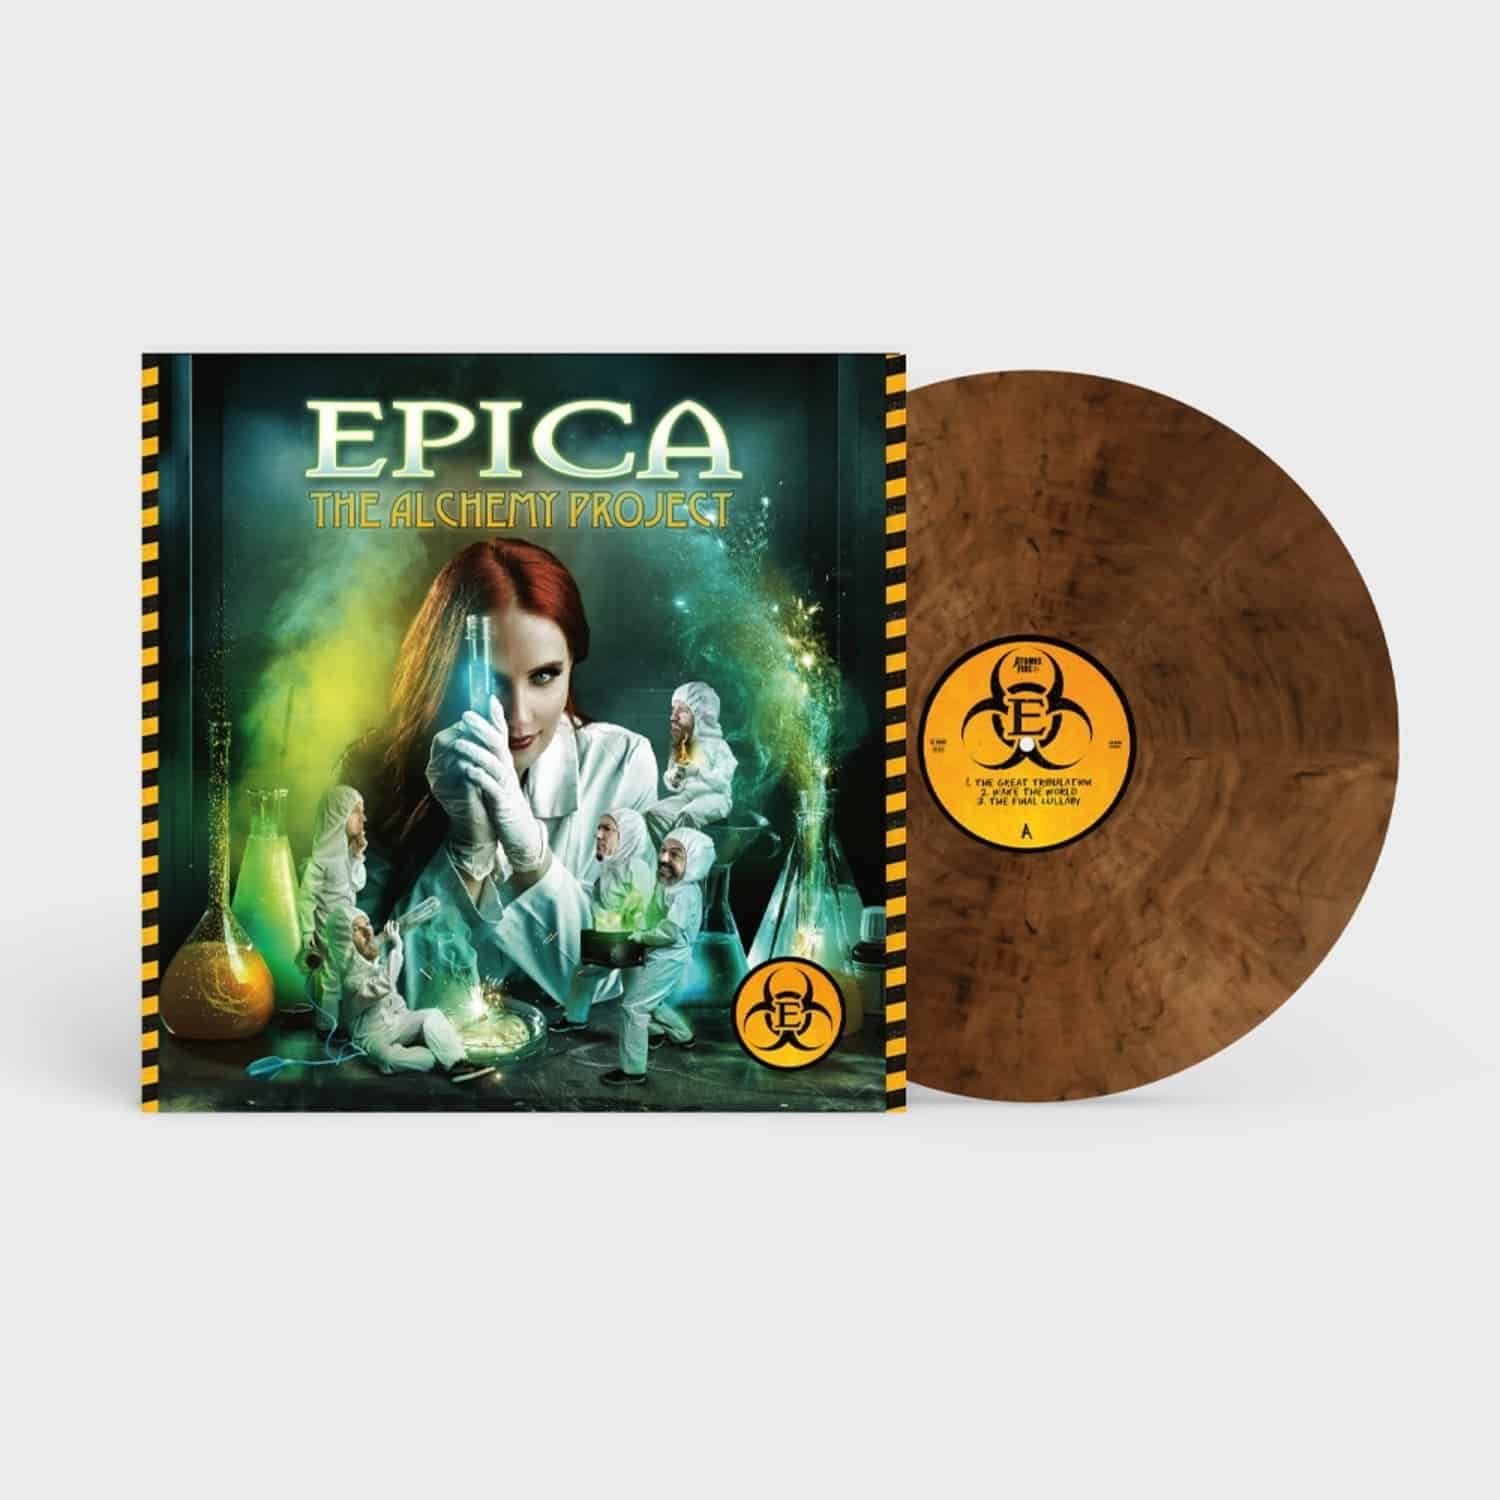 Epica - THE ALCHEMY PROJECT